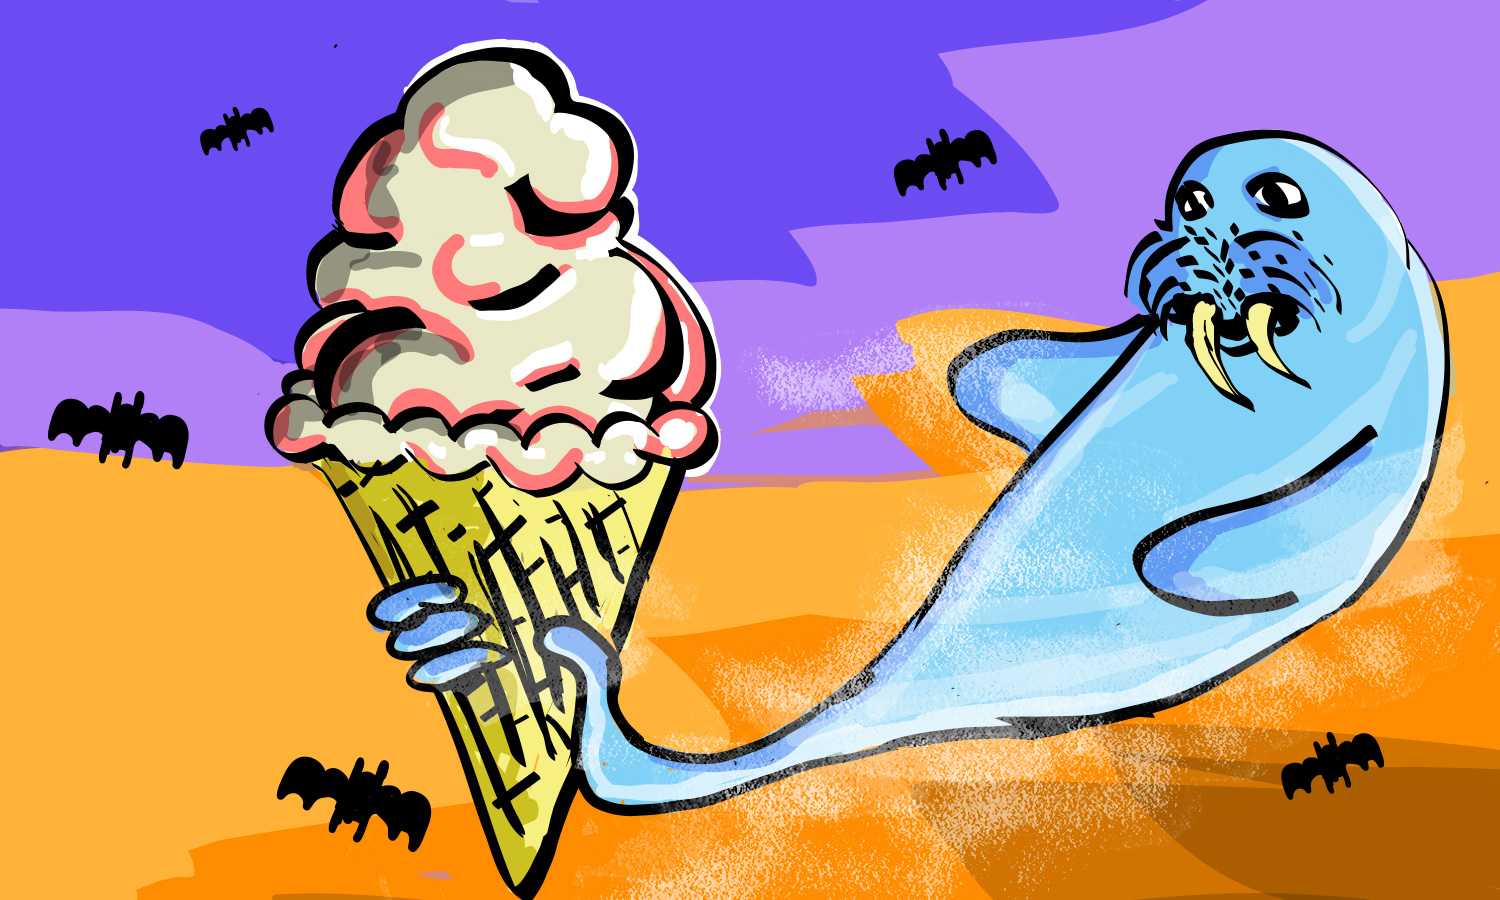 A blue walrus ghost holding onto a ice cream cone surrounded by bats